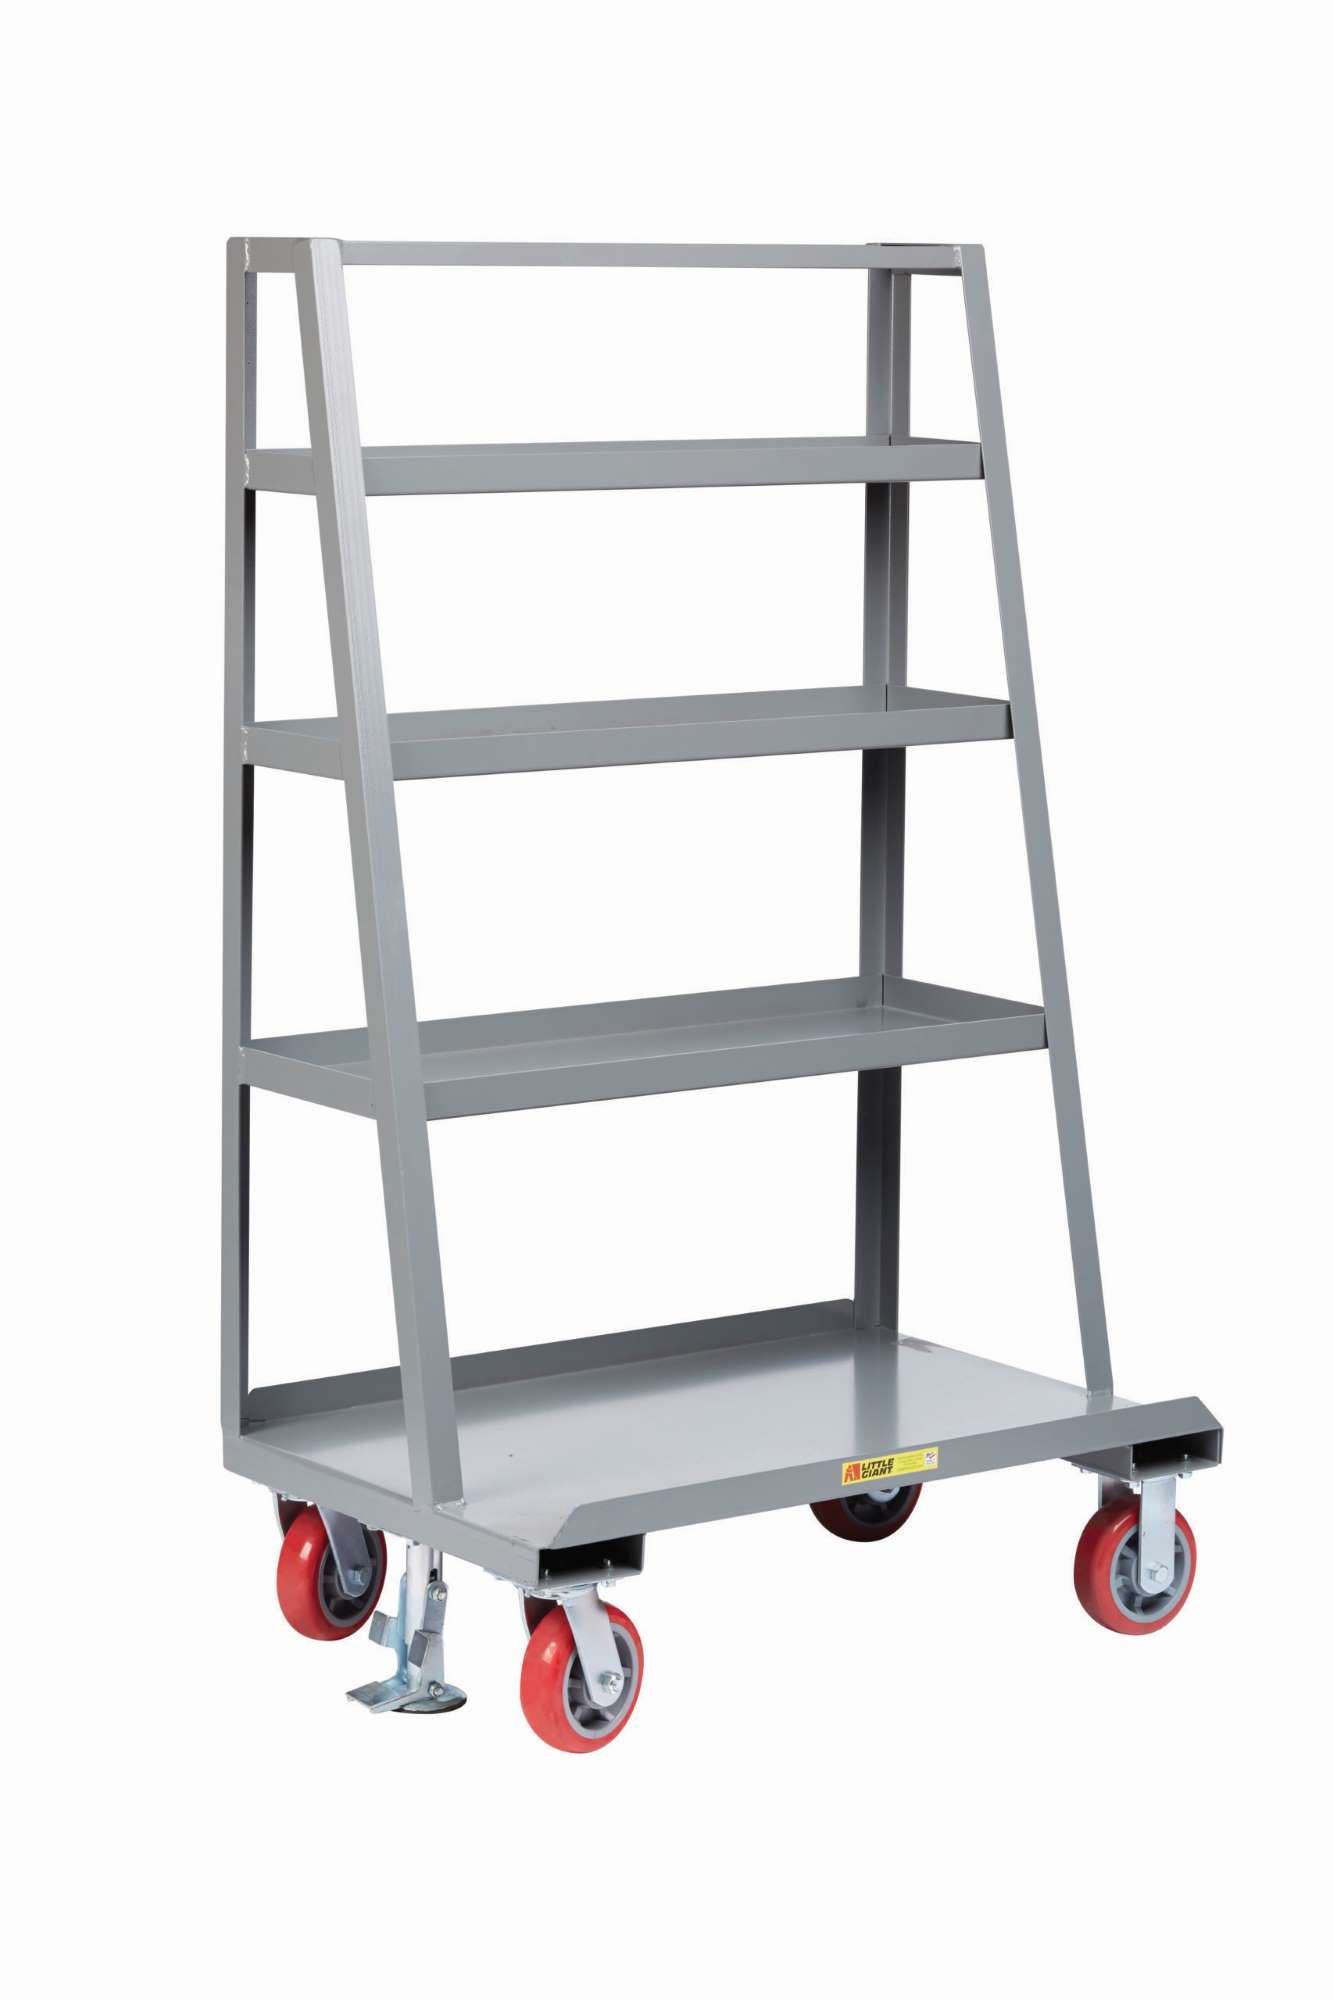 Little Giant, A-frame sheet & panel truck with back shelf storage, 2000 lbs capacity, 4 shelves, 1-1/2" lip, 2 rigid and 2 swivel casters, 6" wheels, Floor lock, Overall height 60"